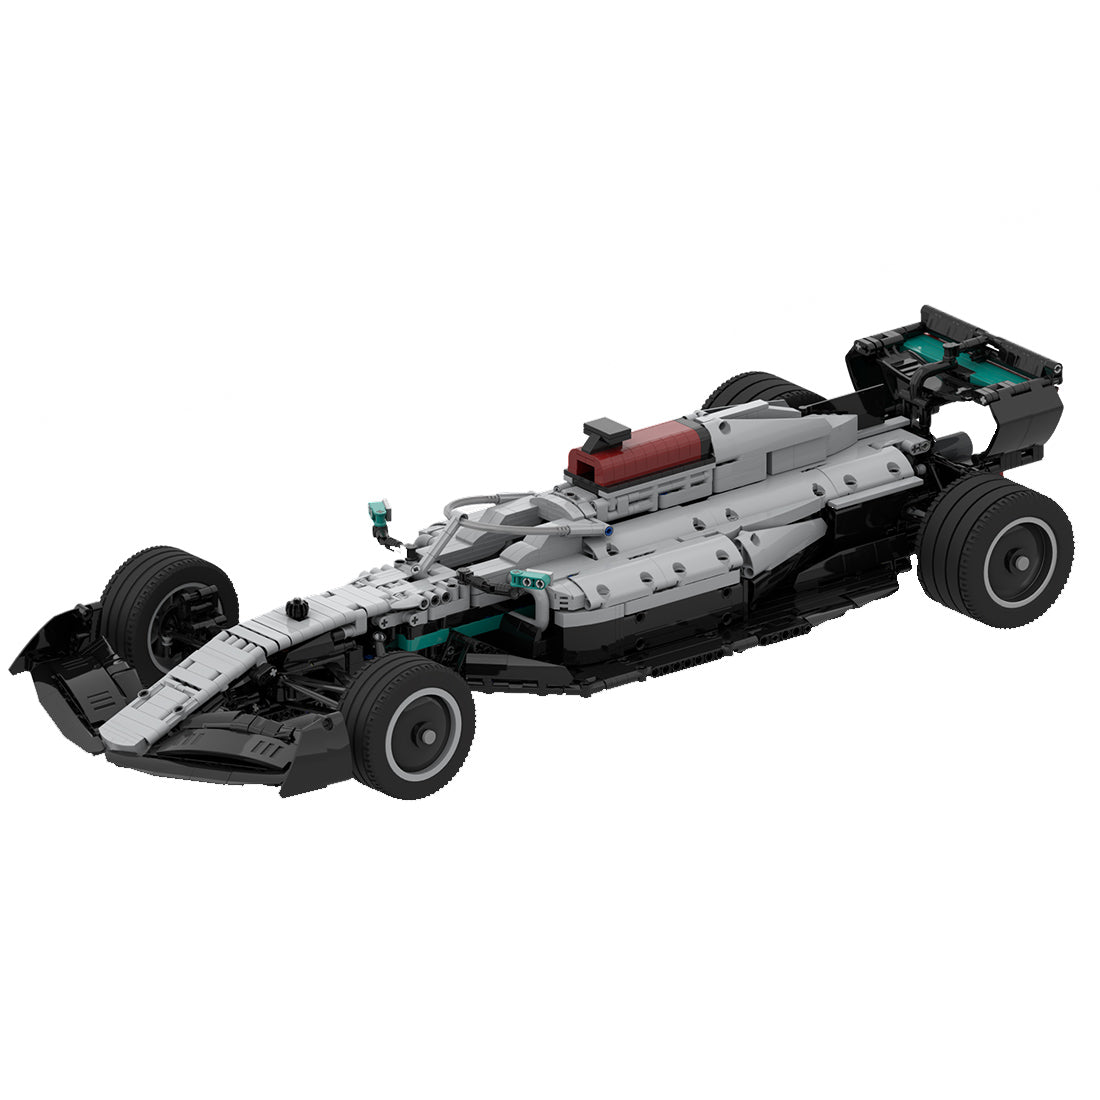 Mercedes F1 W13 1:8 | s set, compatible with Lego